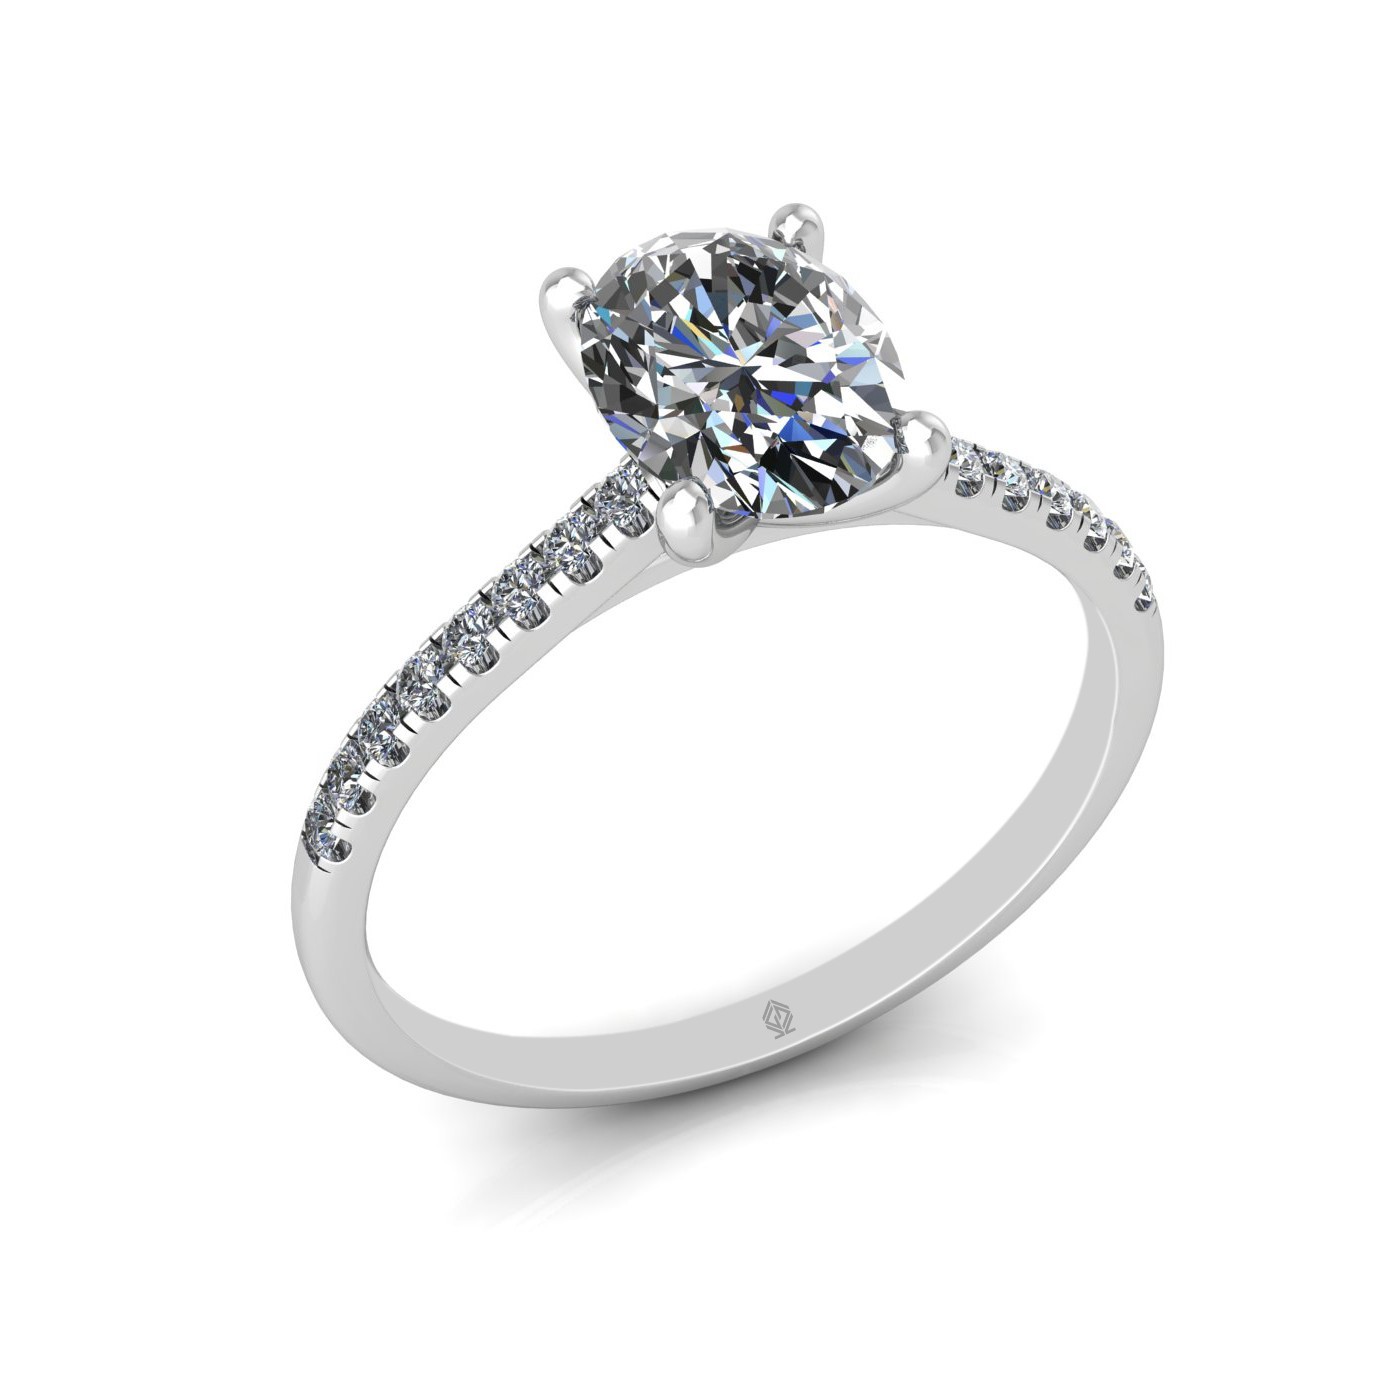 18K WHITE GOLD 4 PRONGS OVAL CUT DIAMOND ENGAGEMENT RING WITH WHISPER THIN PAVÉ SET BAND